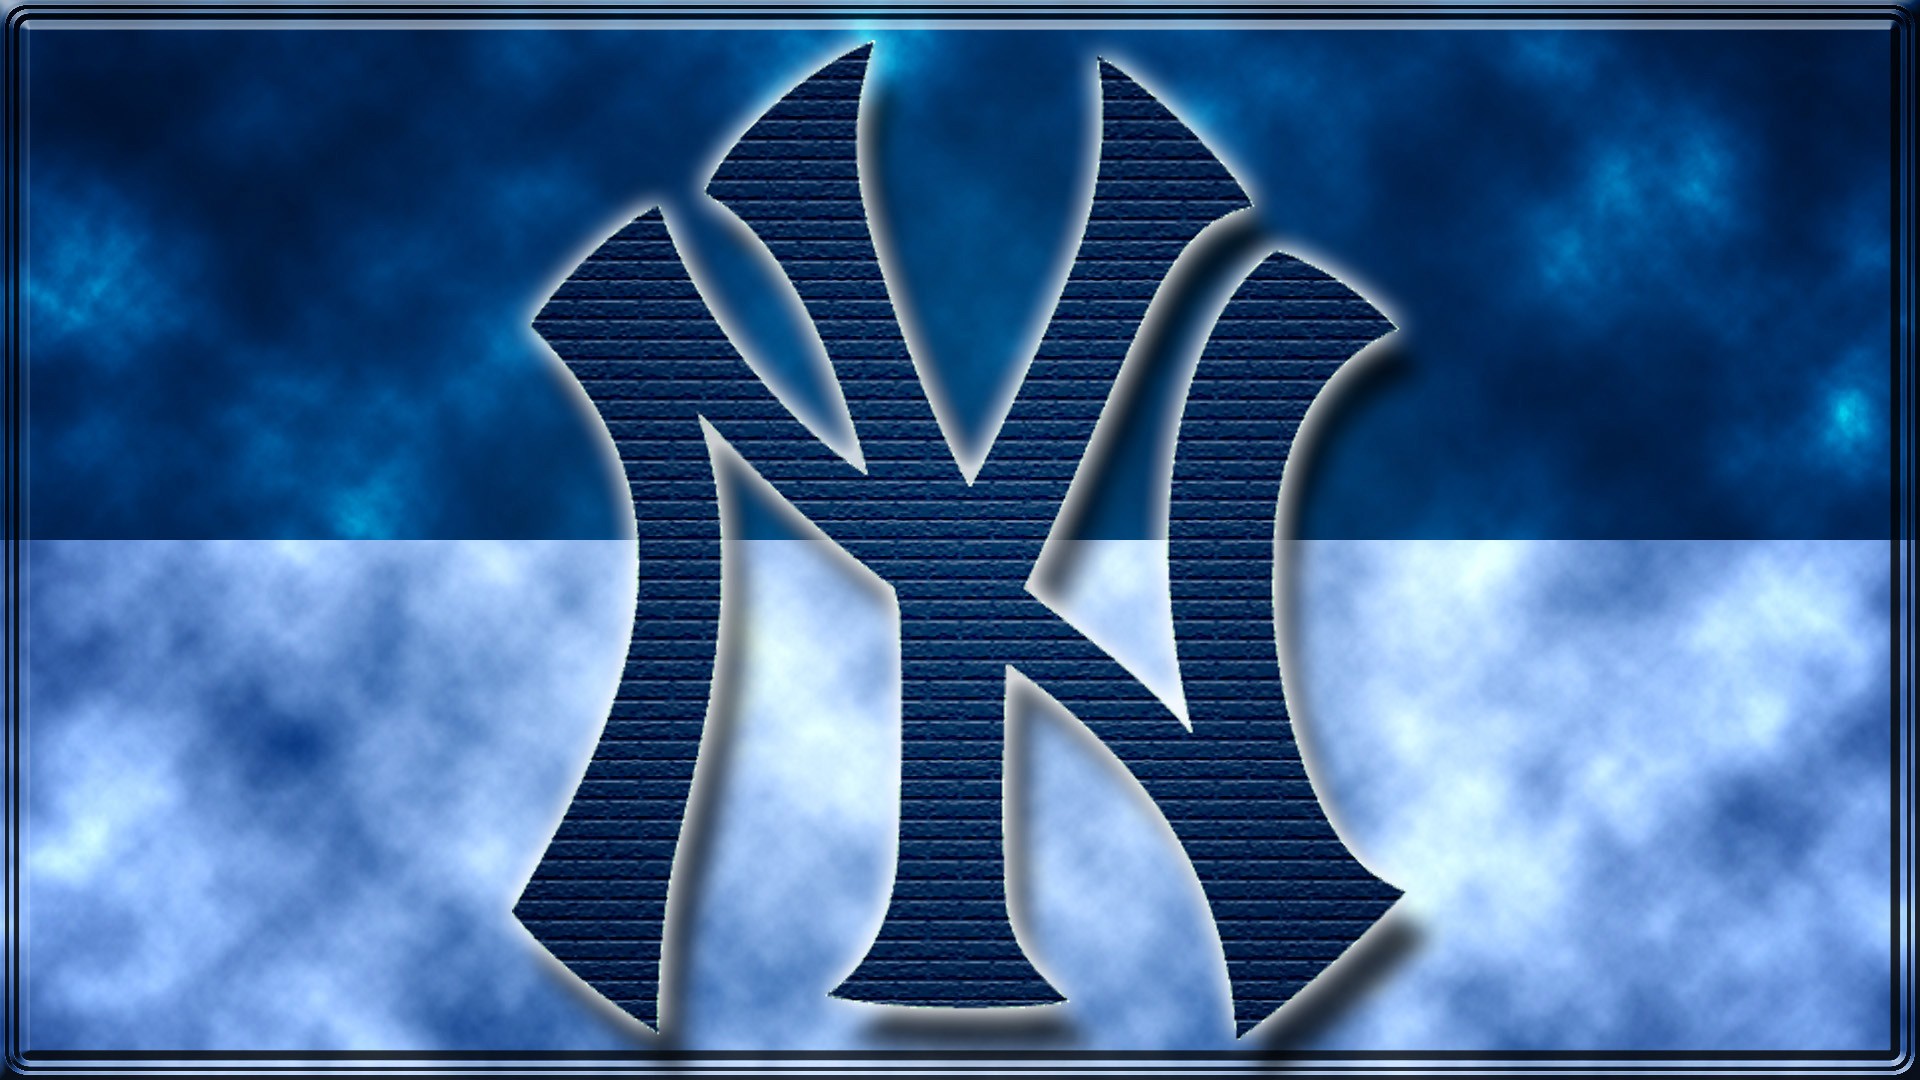 HD Desktop Wallpaper NY Yankees with high-resolution 1920x1080 pixel. You can use this wallpaper for Mac Desktop Wallpaper, Laptop Screensavers, Android Wallpapers, Tablet or iPhone Home Screen and another mobile phone device